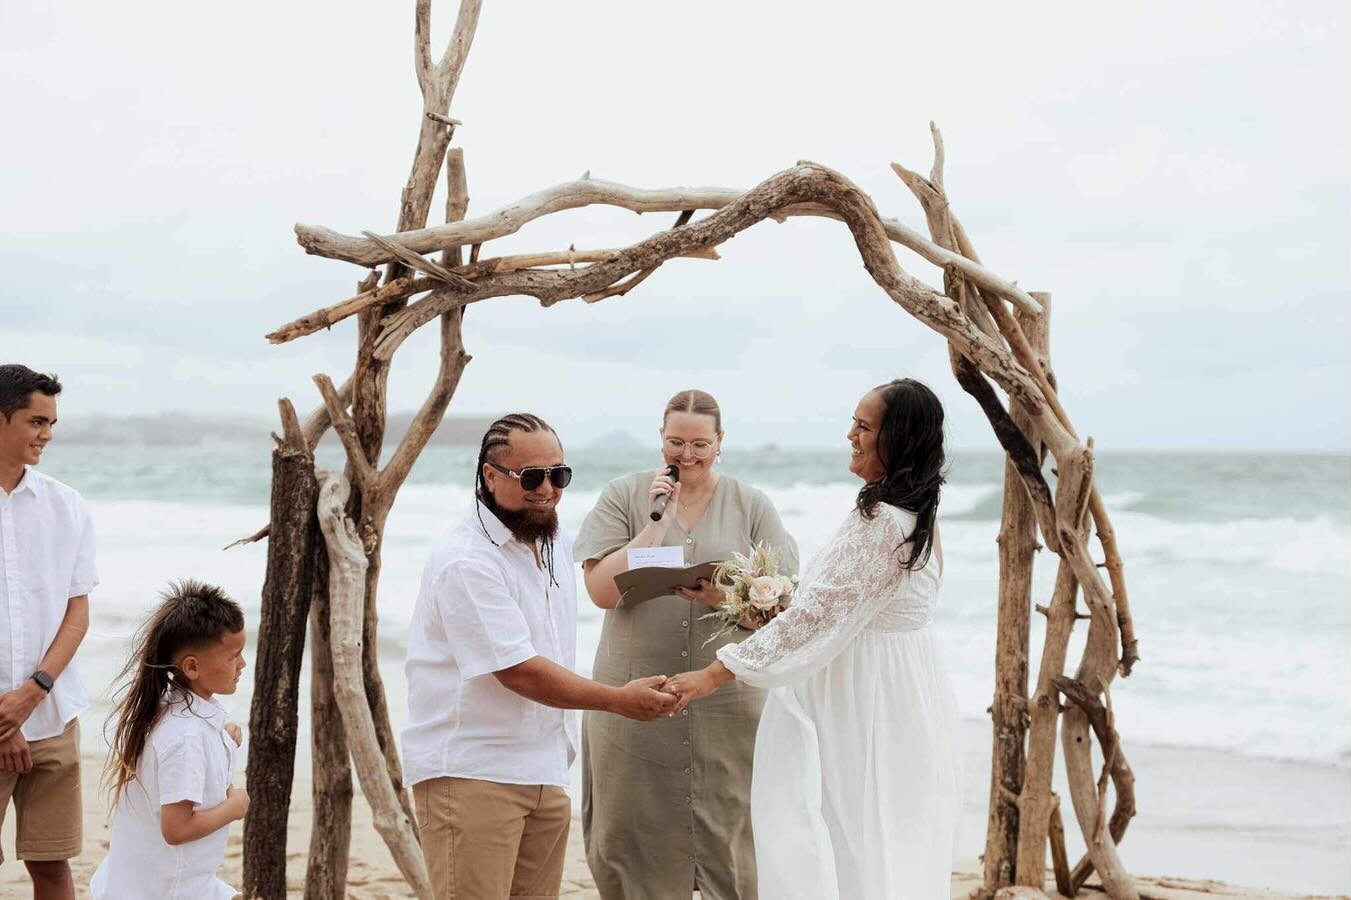 A S T O N &amp; J A Y D A I N // I knew from the moment I met these two that they created home everywhere they went, and their wedding was a total testament to that. From being welcomed to their rehearsal by the whānau with open arms and a cold bevvi